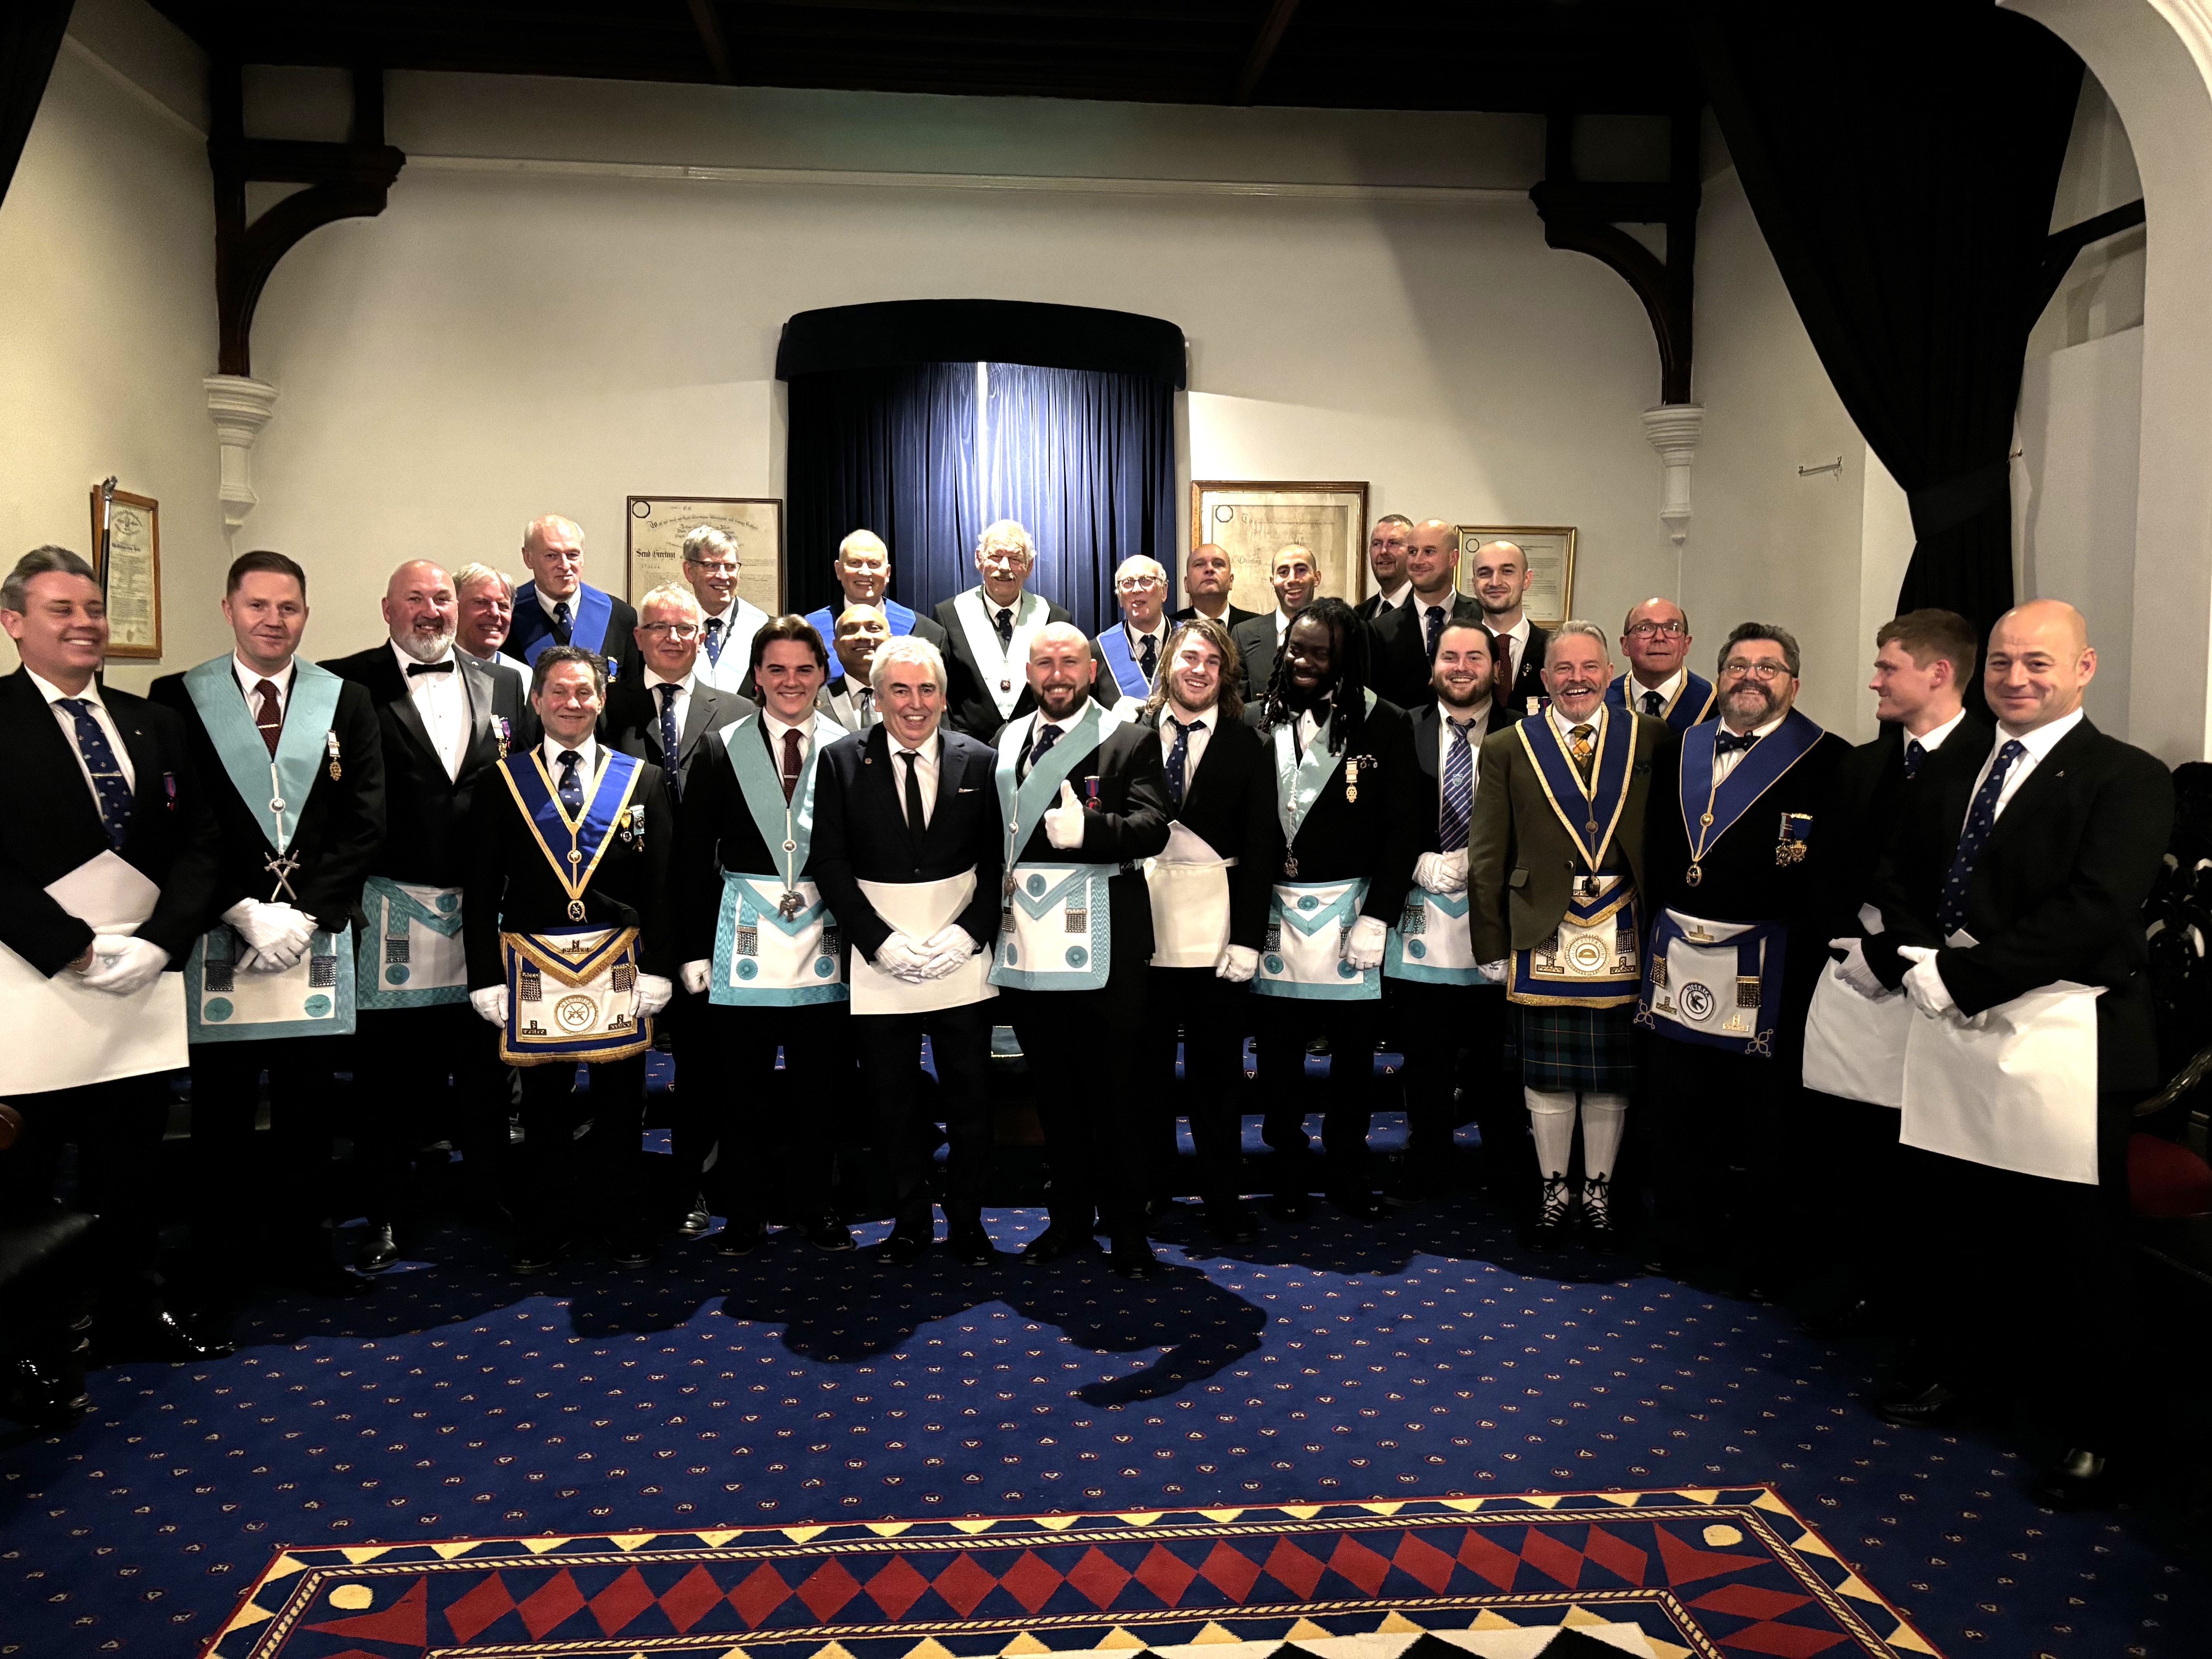 Freemasons of Sarum Lodge in Wiltshire talking a group photo in their Lodge Room after the Initiation of Bro Richard